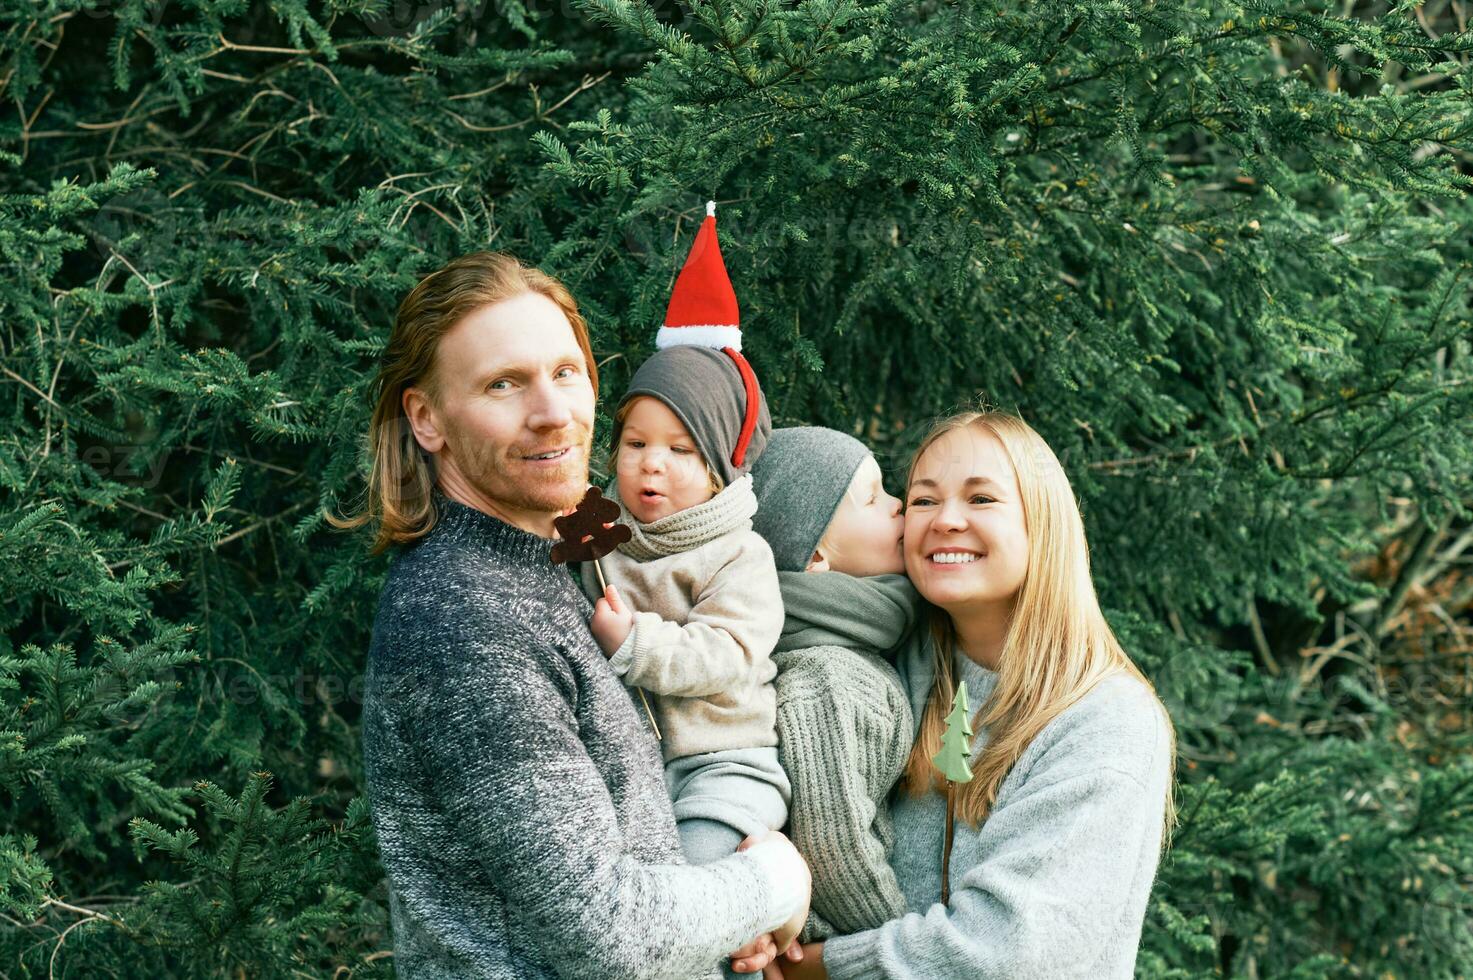 Outdoor portrait of beautiful happy young family of 4 posing in pine forest, wearing warm pullovers, couple with toddler boy and baby girl having good time at nature, cold weather, Christmas theme photo